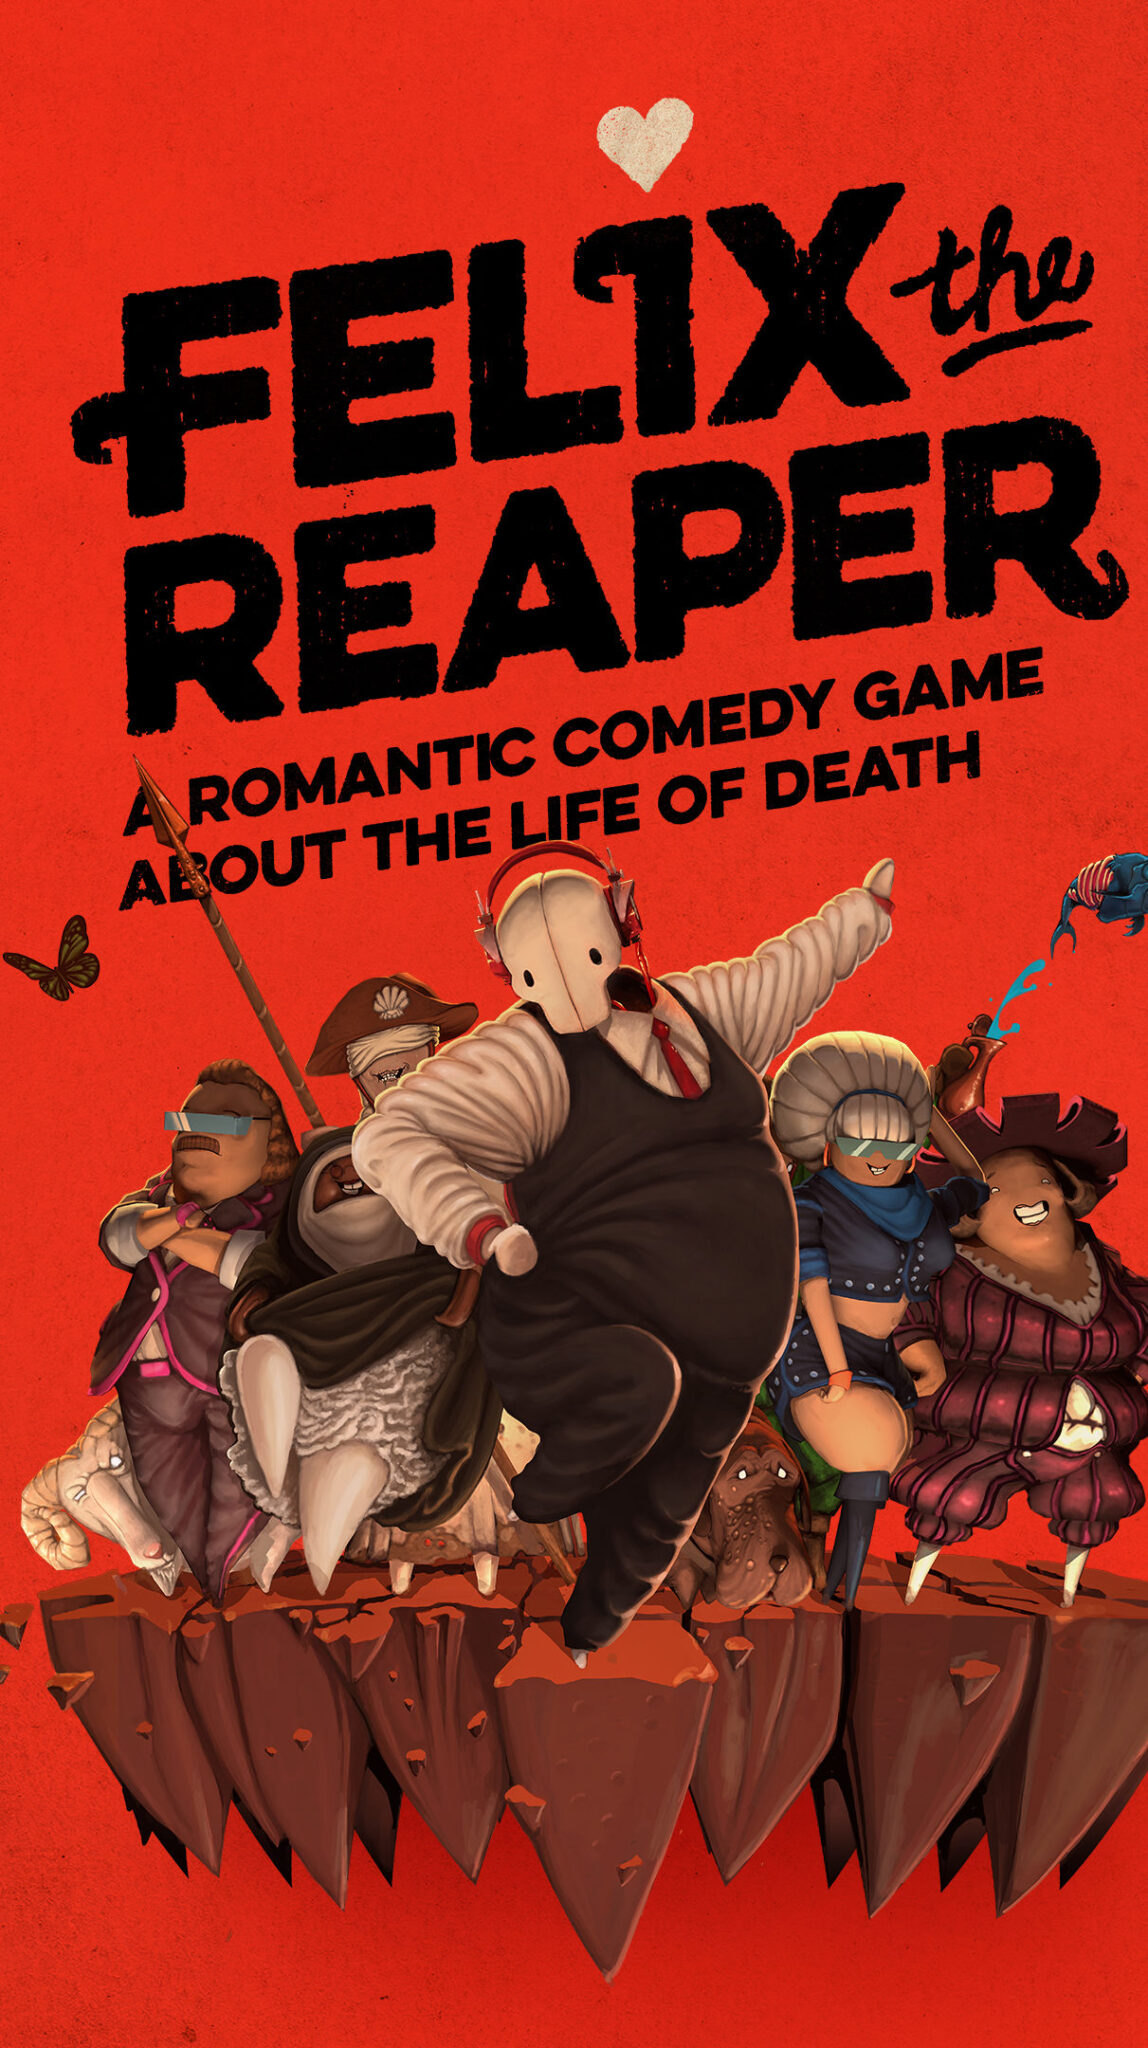 Felix the reaper chega em 17 de outubro | cropped felix the reaper poster scaled | married games física | física | felix the reaper